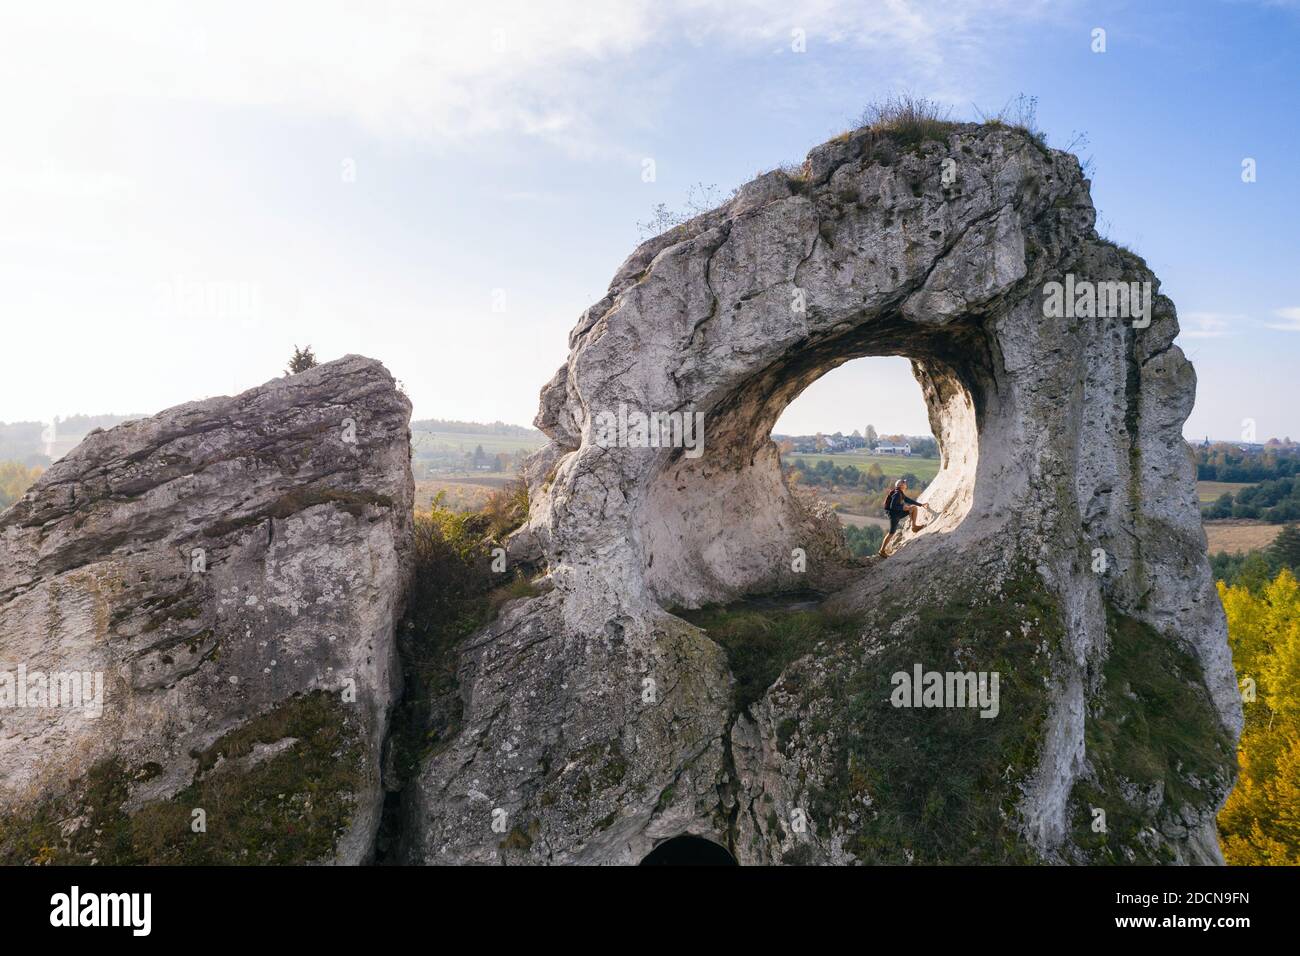 The Great Window, also known as the Large Window, is a group of limestone rocks located in Piaseczno in the Kroczyce, in Zawiercie County, in the Sile Stock Photo